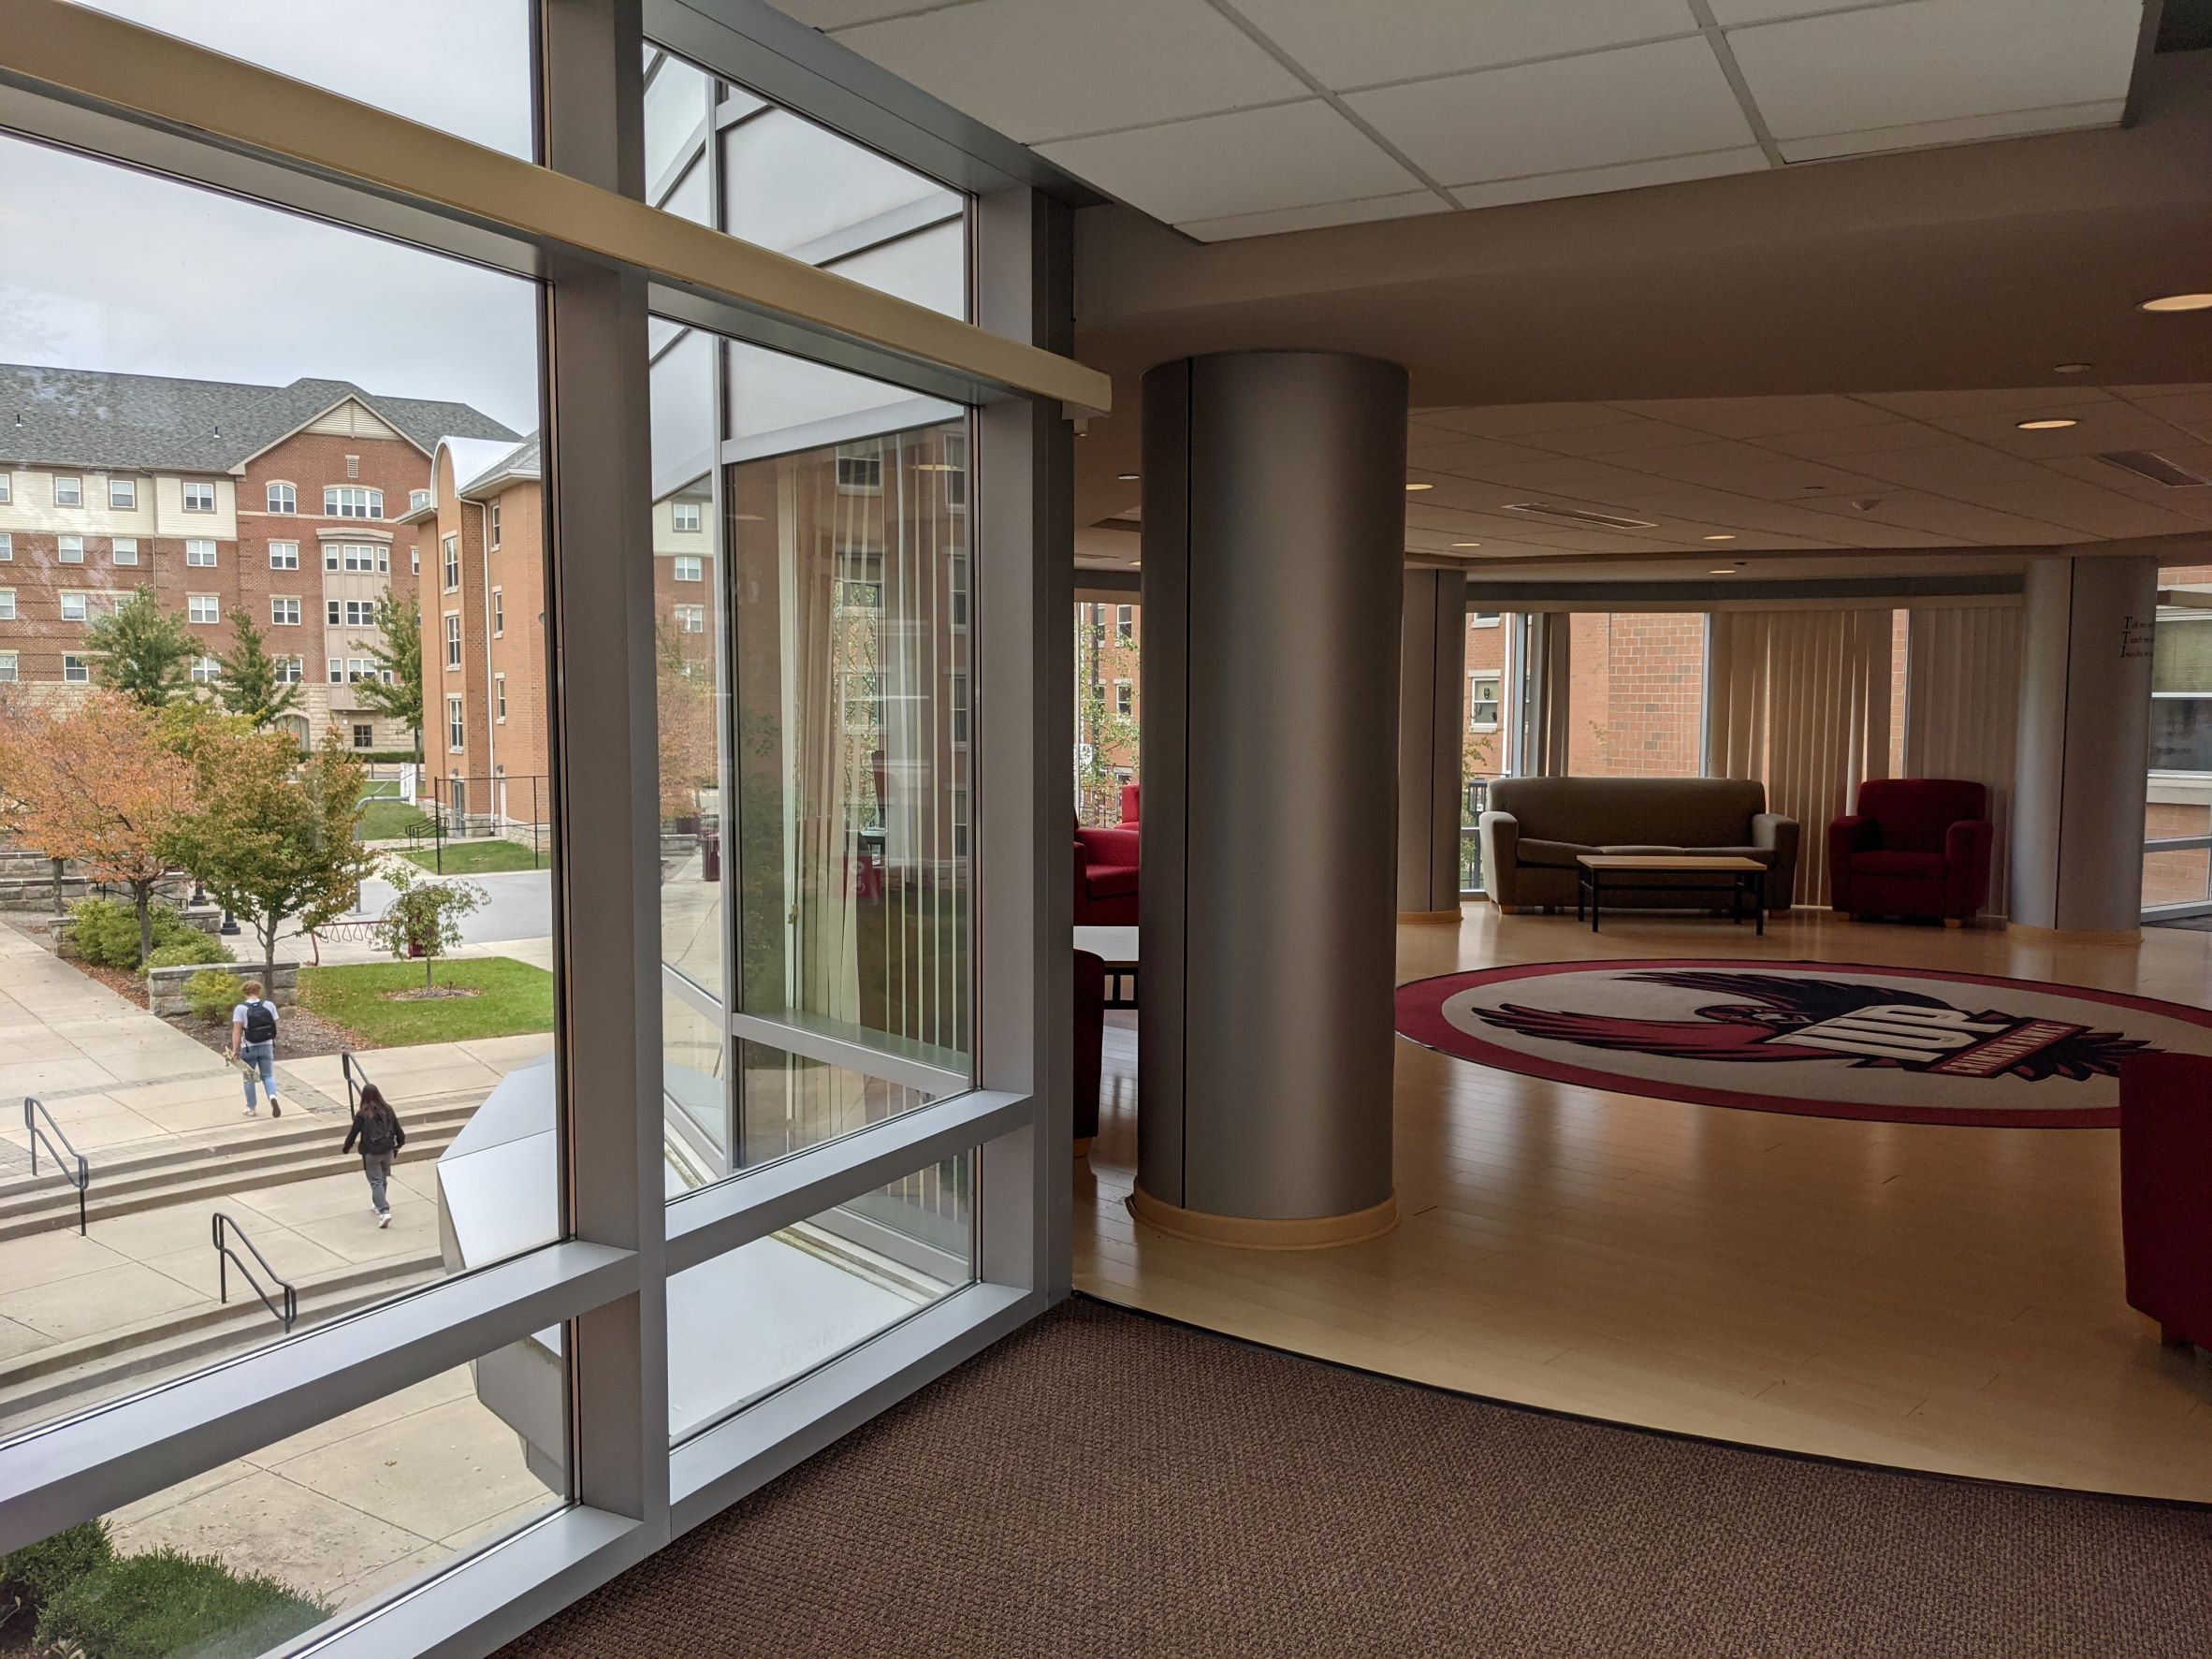 Large community lounge space with IUP school logo on carpet inlaid into hardwood floors, round metal columns with glass everywhere overlooking outdoor courtyard and plaza beyond with  living learning student housing community dormitory building in the background